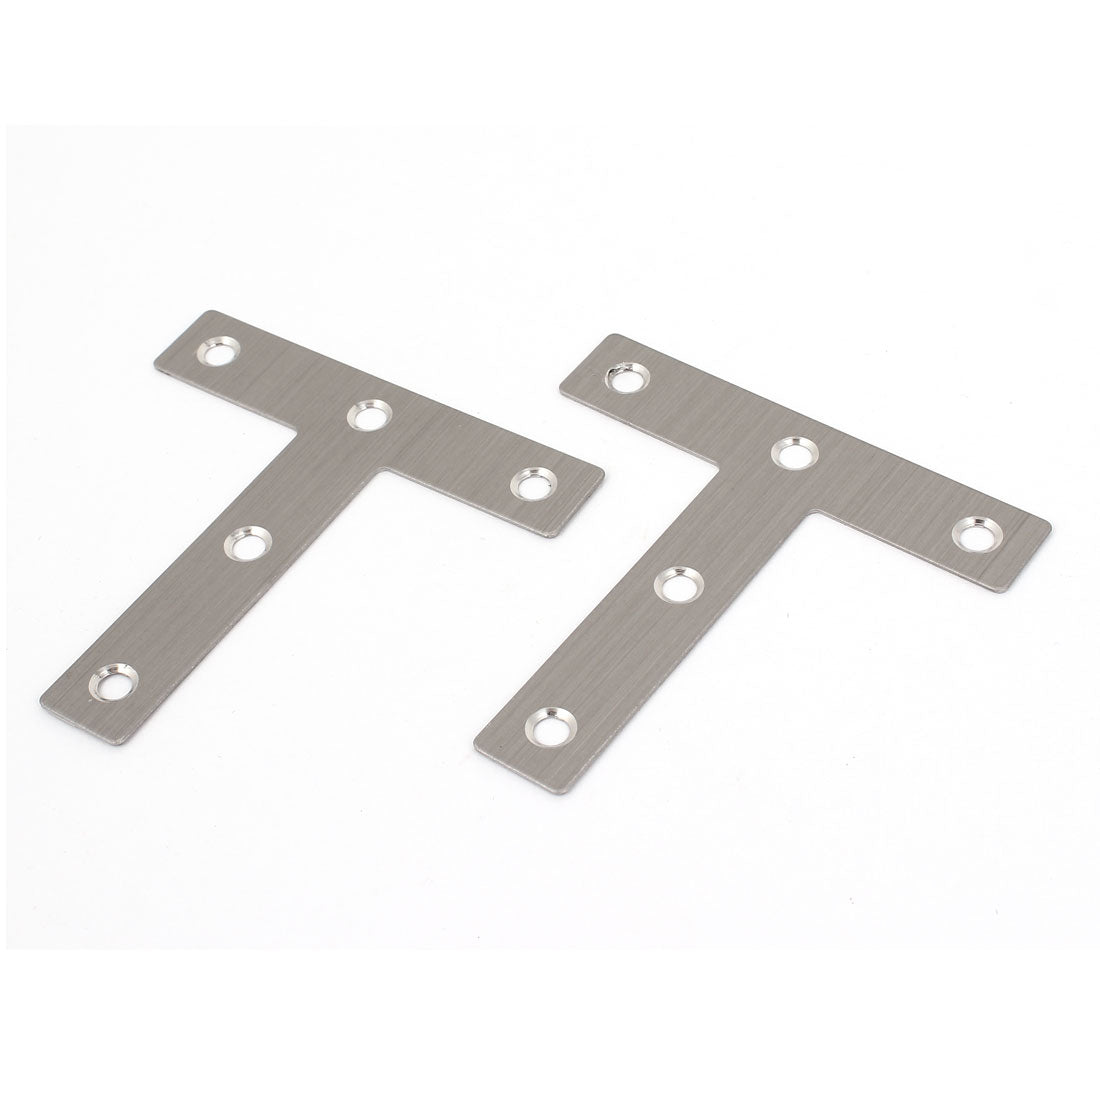 uxcell Uxcell 2pcs Flat T Shape Repair Mending Plate Connector Joining Bracket 3" x 3"